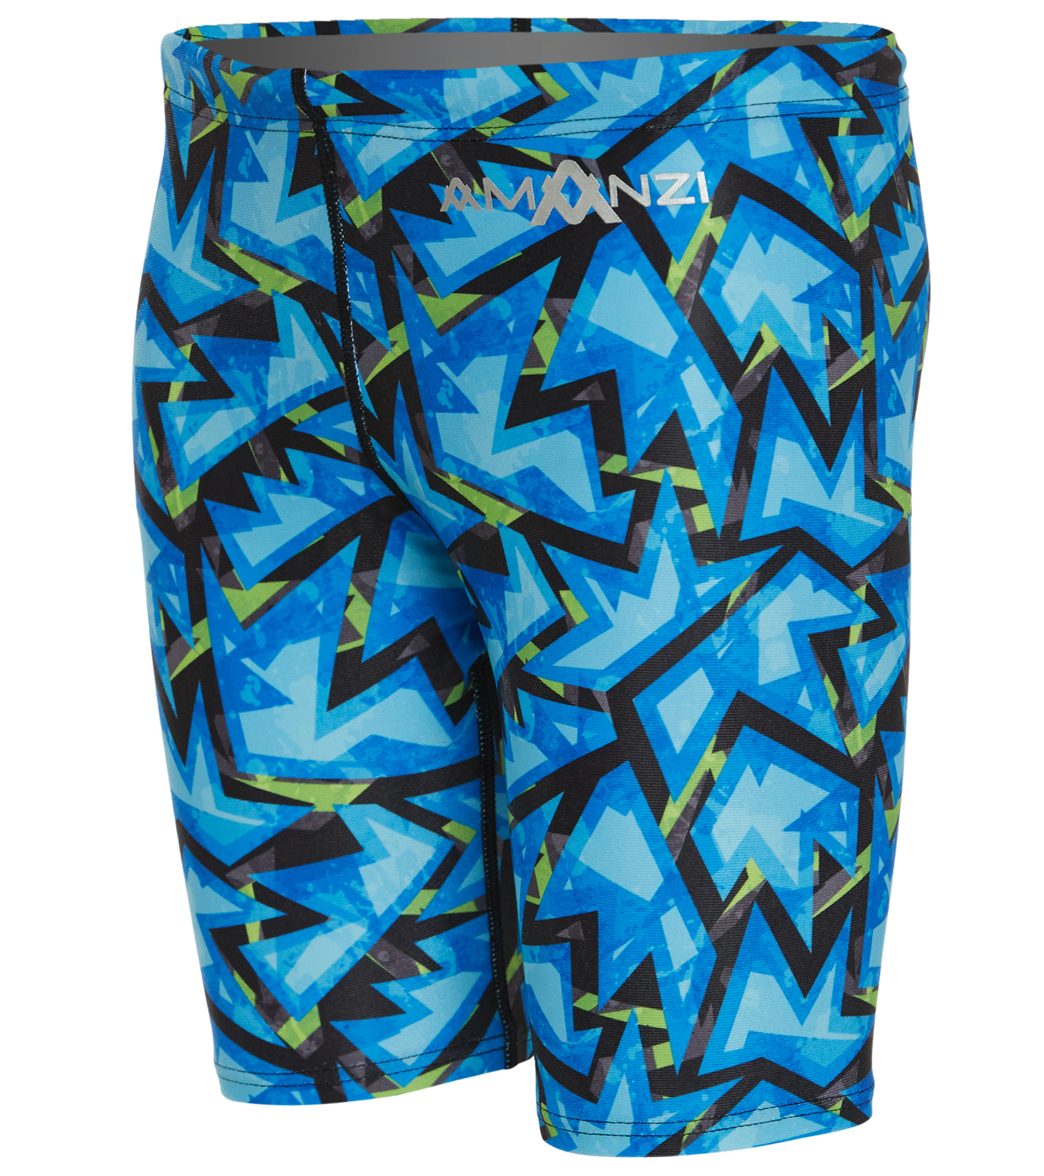 Amanzi Boys' Speed Racer Jammer Swimsuit at SwimOutlet.com